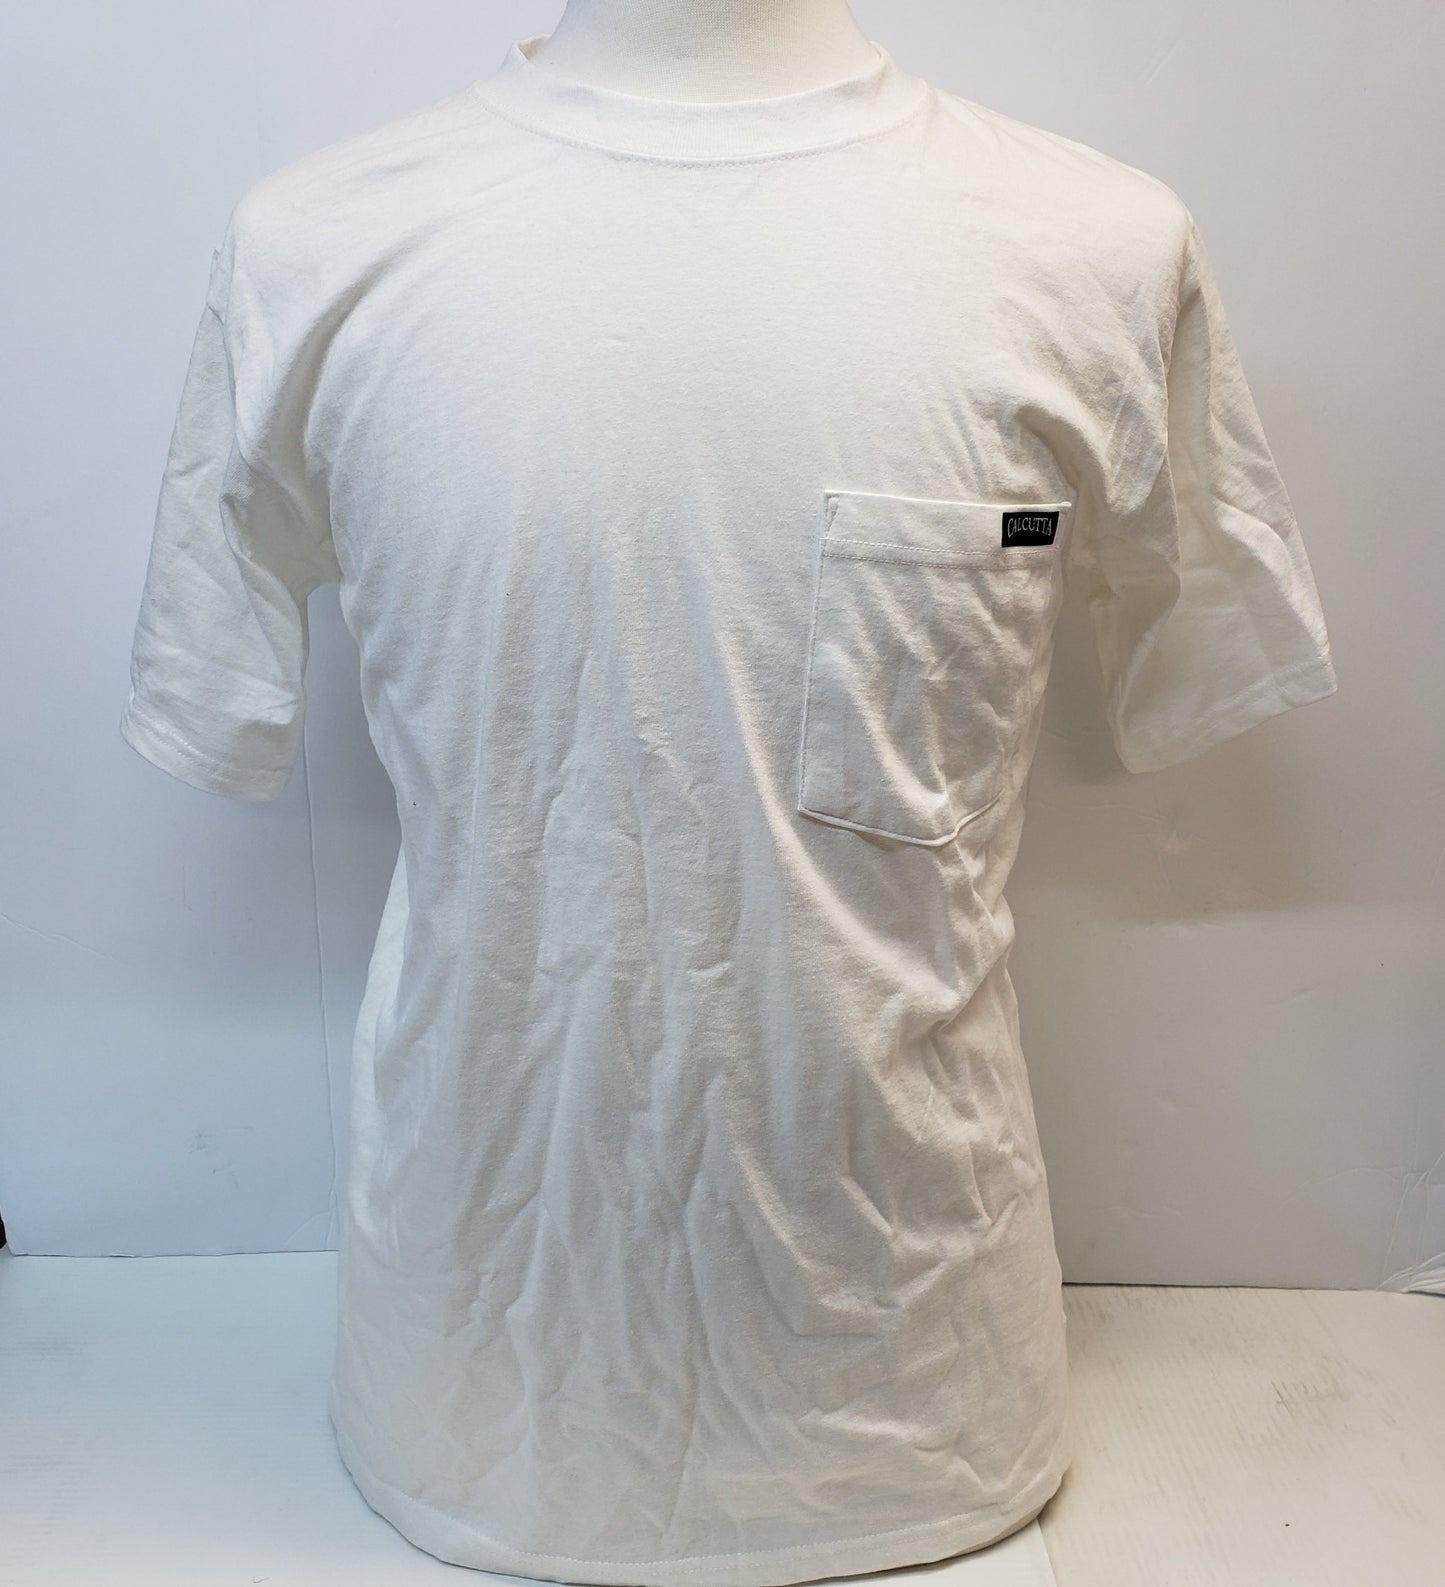 New Authentic Calcutta S/S T-Shirt White/ Front Pocket/ Back "Best Damn Bait You Will Ever Drag" Logo